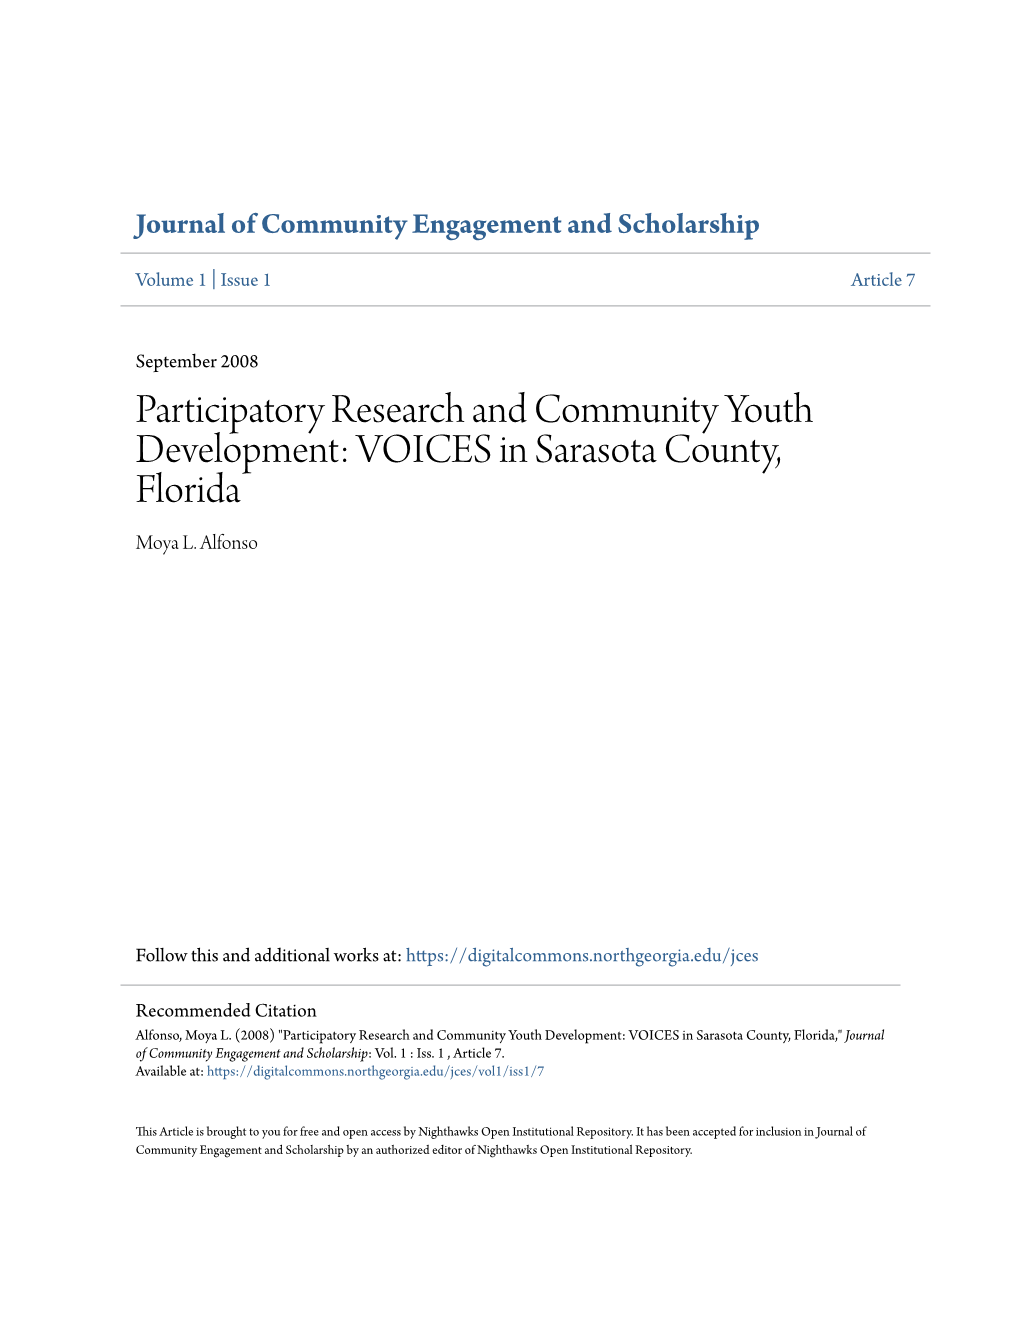 Participatory Research and Community Youth Development: VOICES in Sarasota County, Florida Moya L